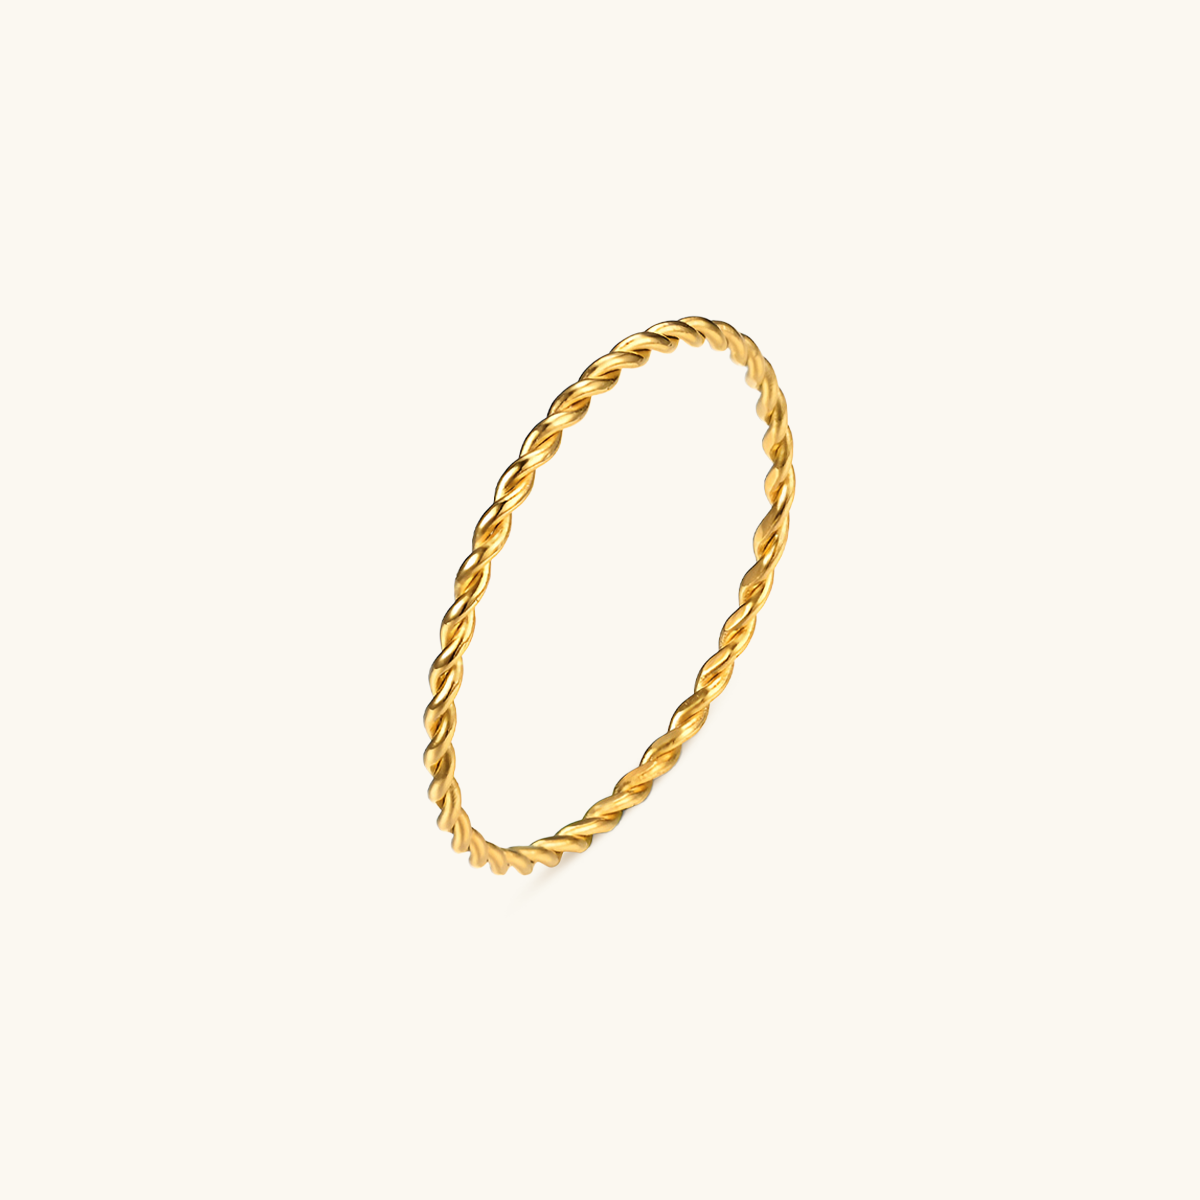 Thin Rope Twist Chain Ring - Gold